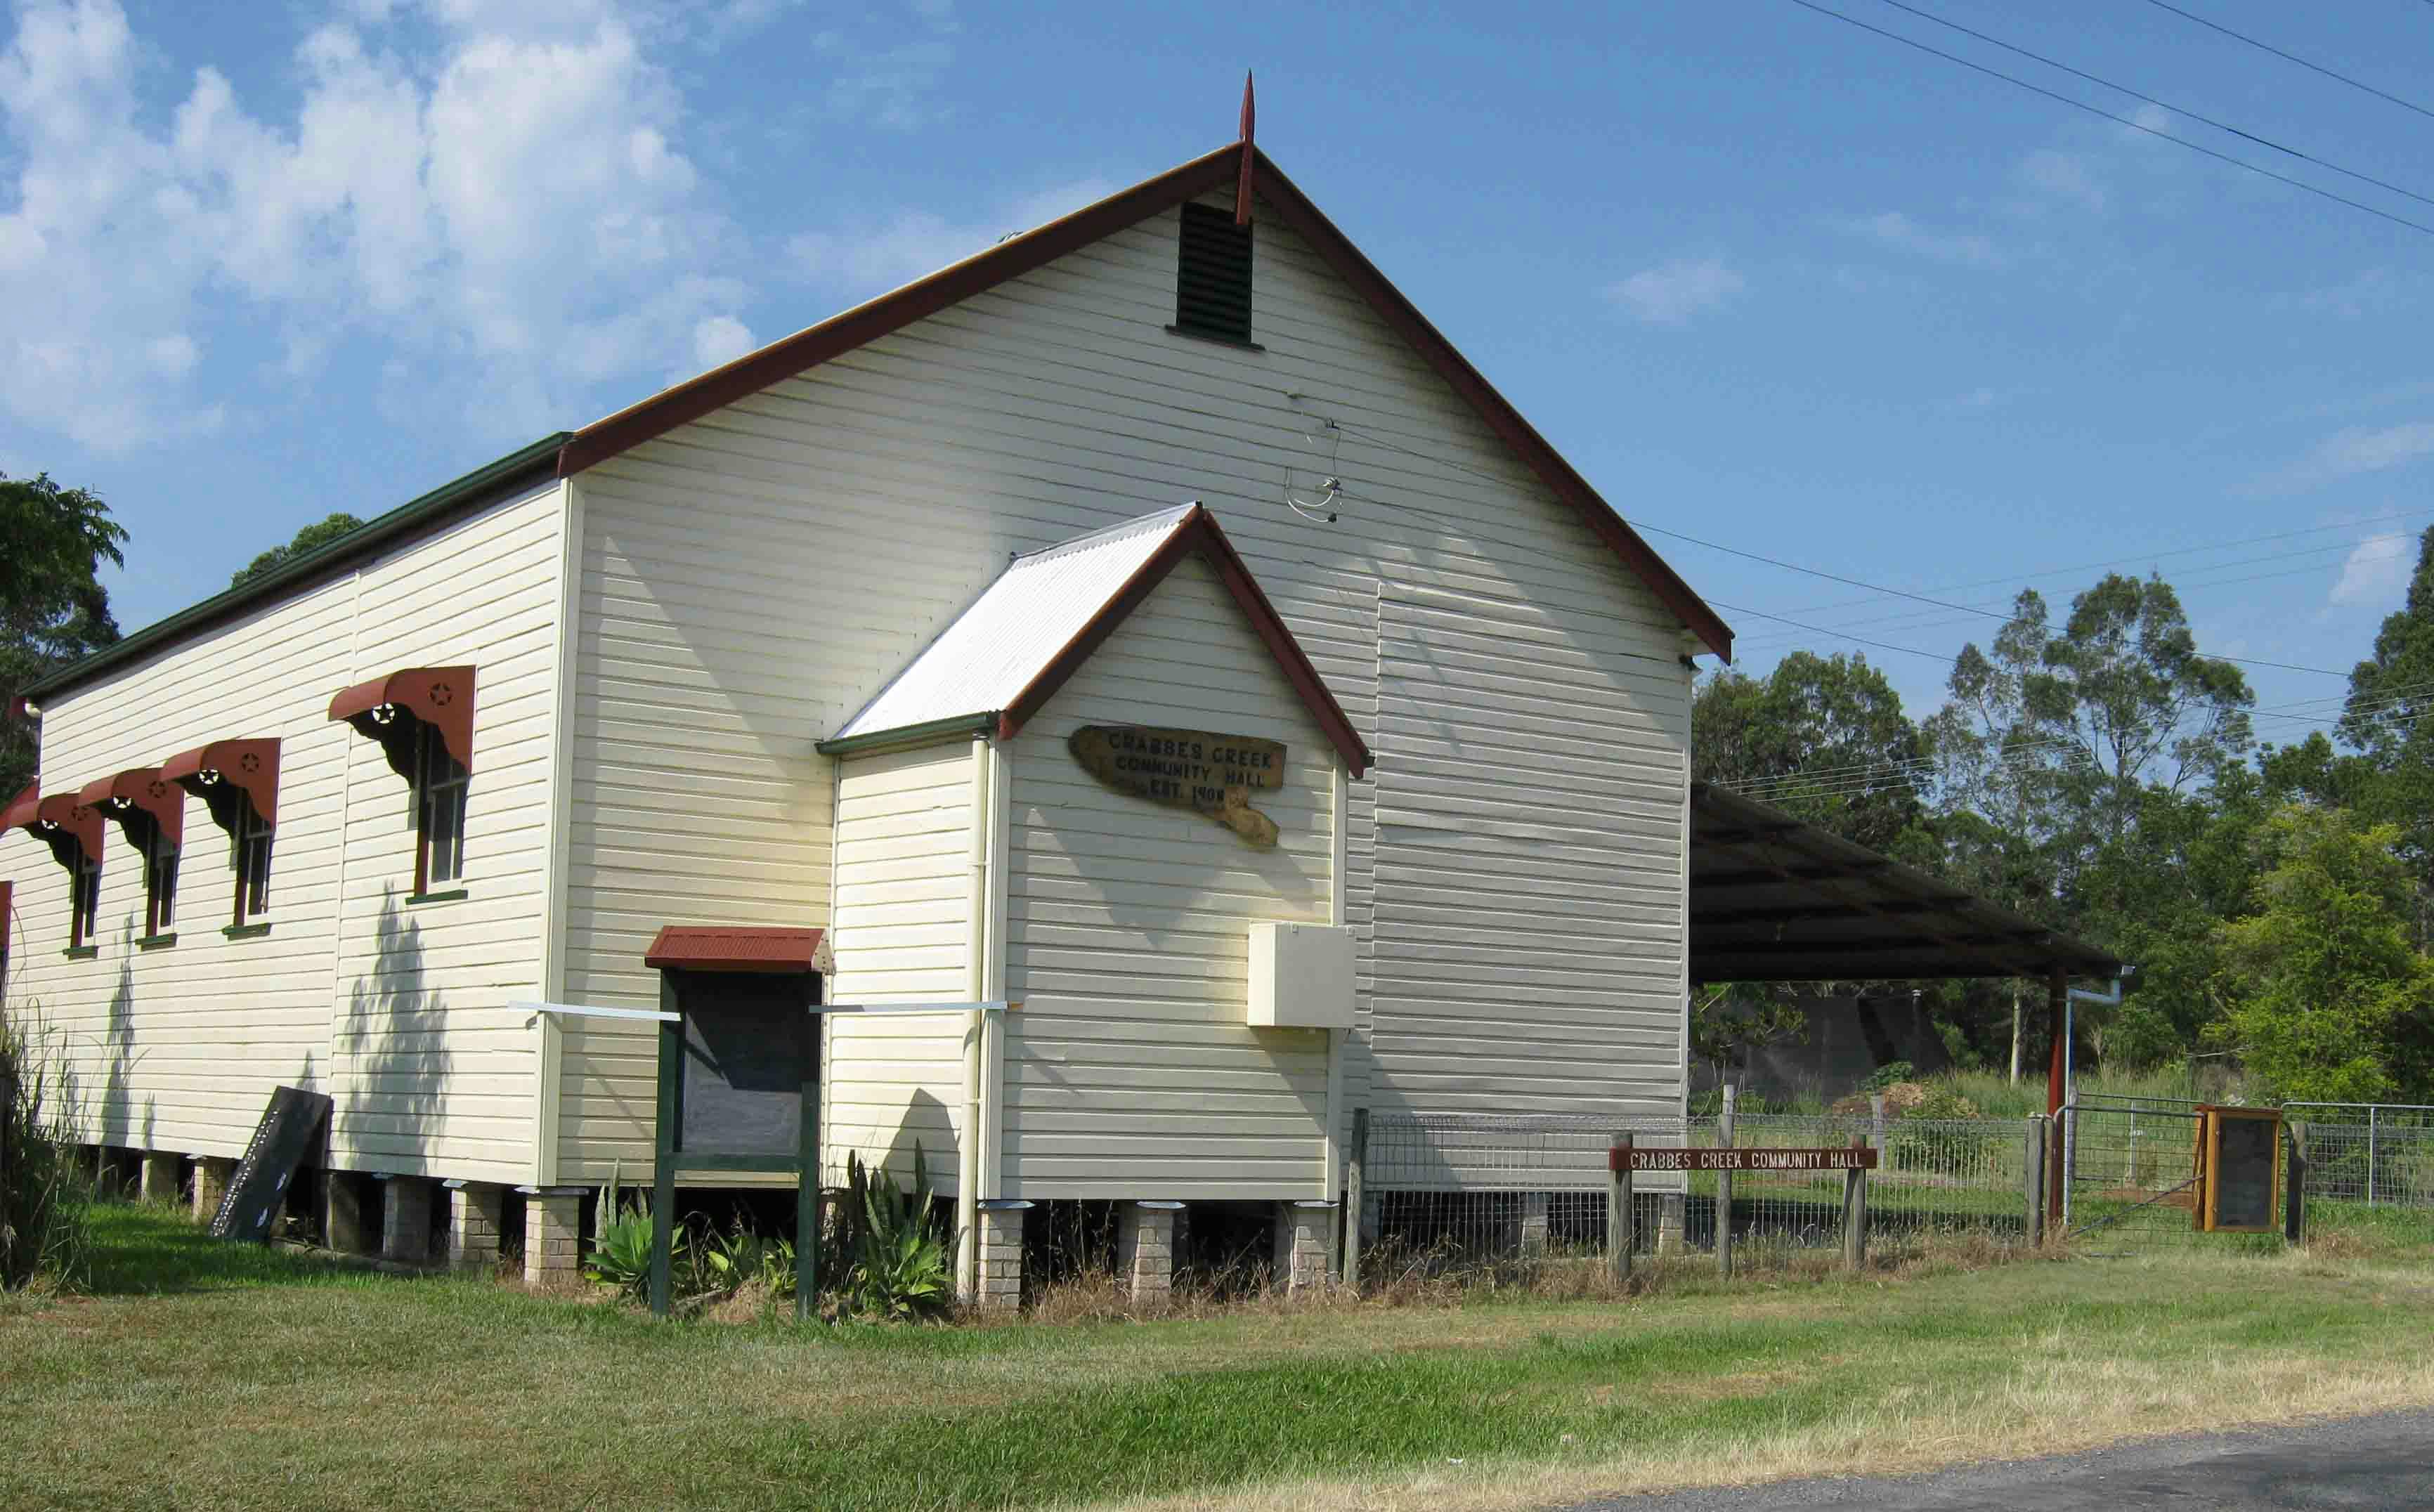 Halls such as the Crabbes Creek Community Hall provide a nucleus for local culture in many towns and villages.